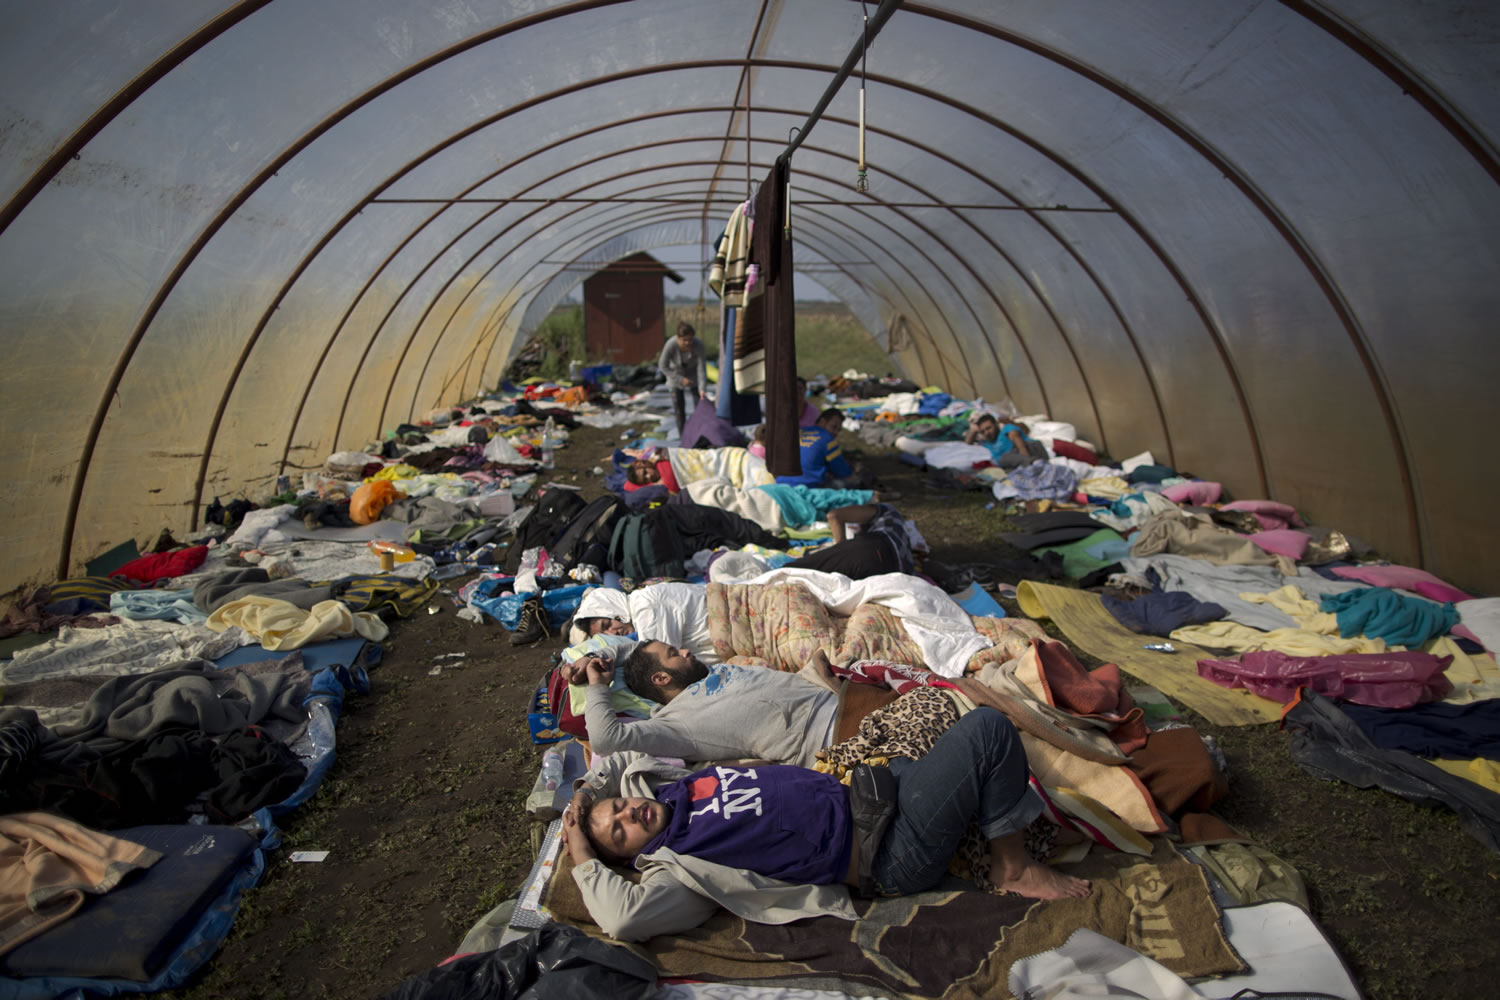 Syrian people sleep inside a greenhouse at a makeshift camp for asylum seekers near Roszke, southern Hungary, Sunday, Sept. 13, 2015. Hundreds of thousands of Syrian refugees and others are still making their way slowly across Europe, seeking shelter where they can, taking a bus or a train where one is available, walking where it isn't.